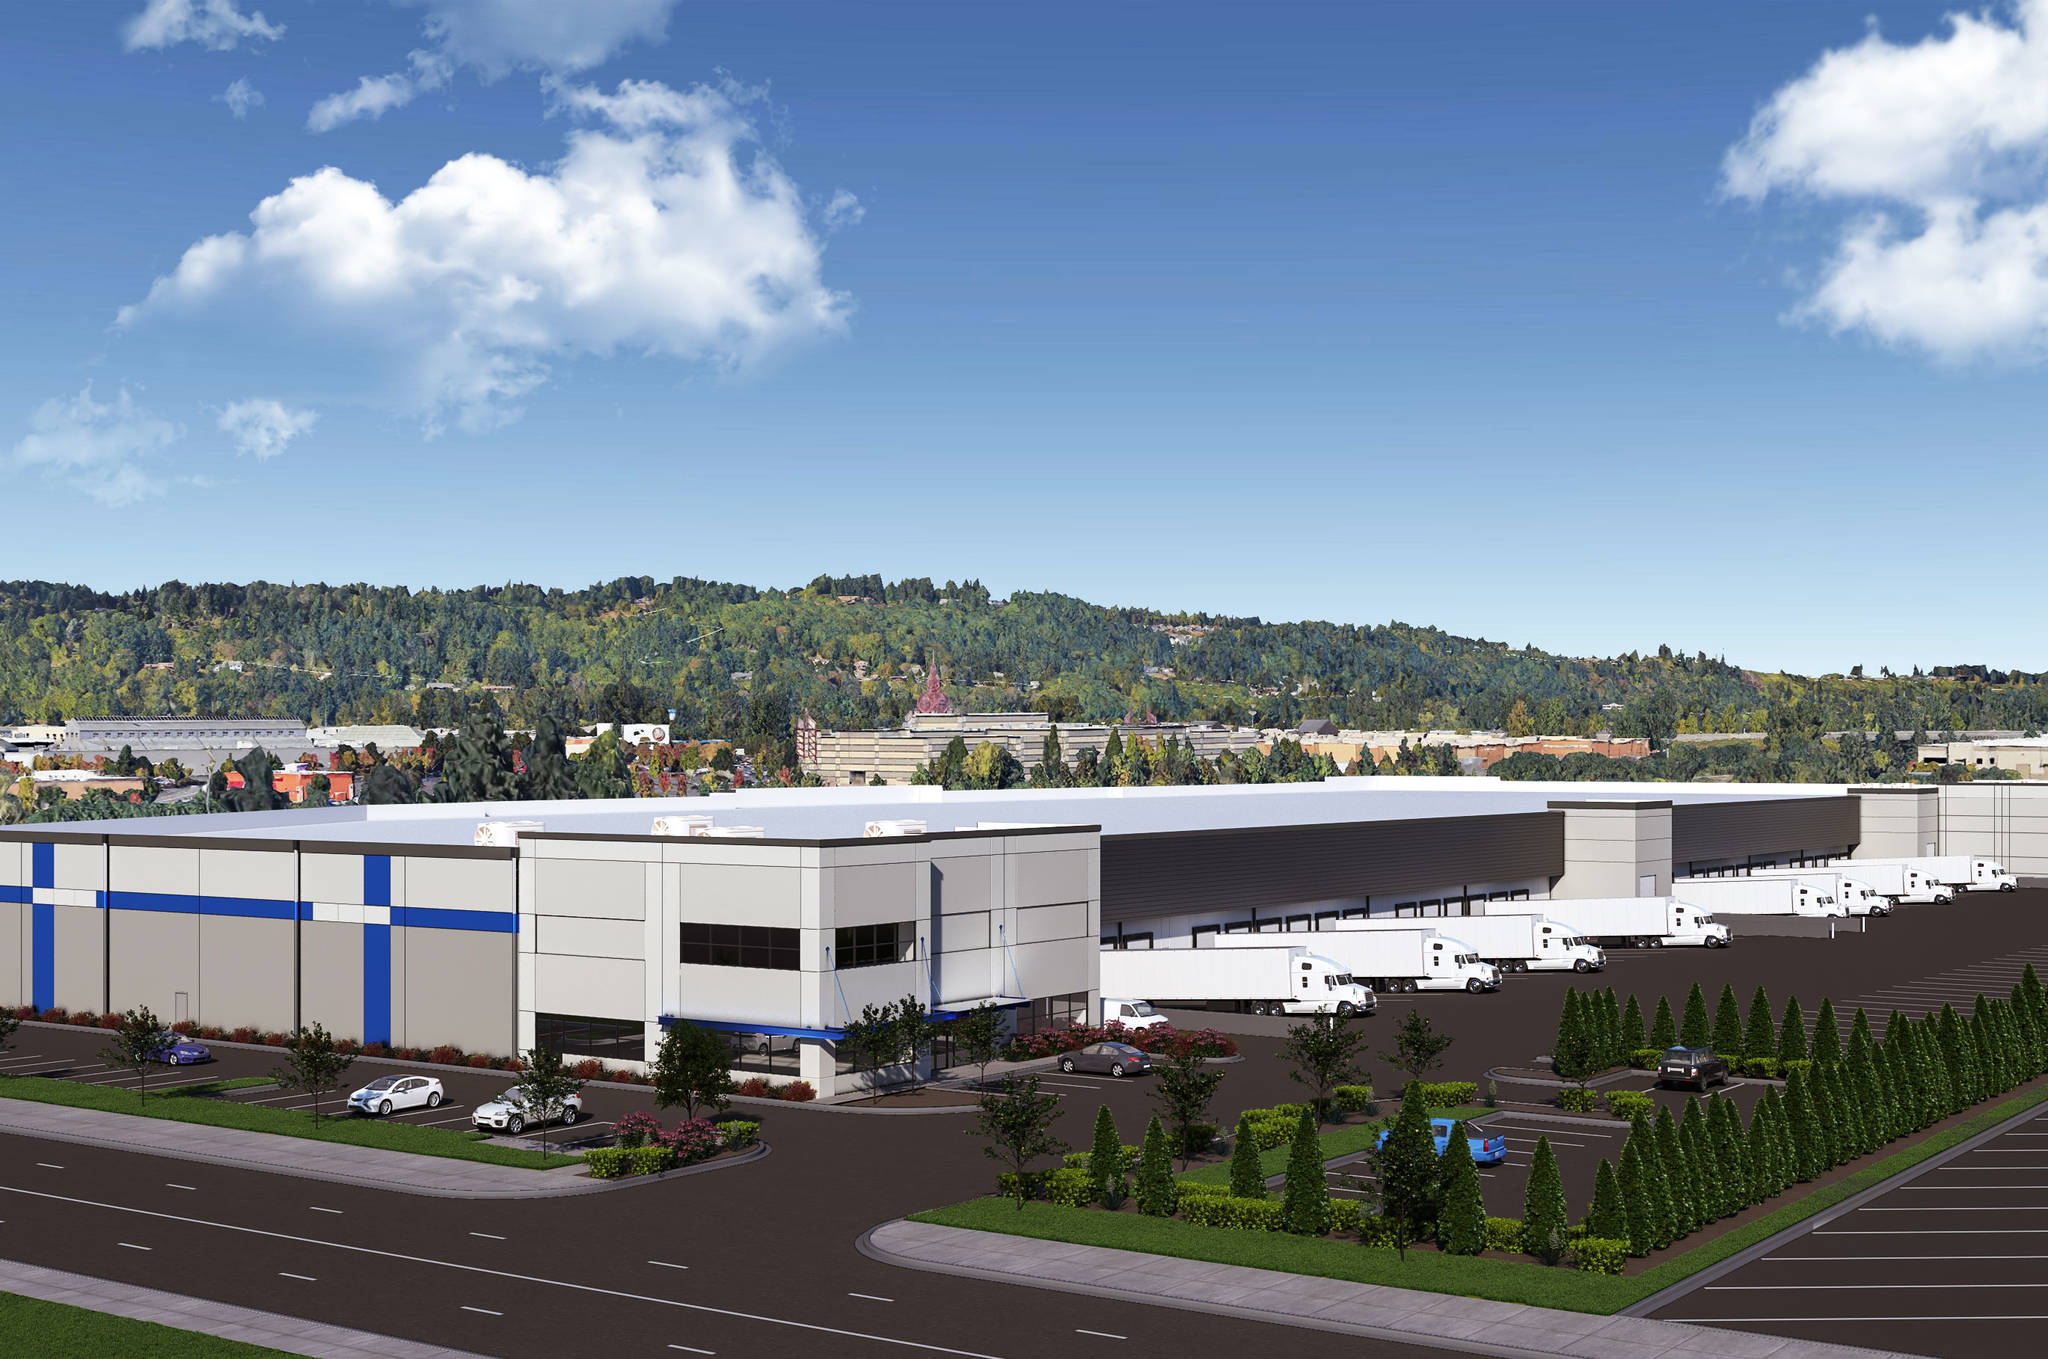 A rendering of the planned warehouse development to be called Bridge Point Kent 300 at the former site of the REI headquarters, 6750 S. 228th Street. COURTESY GRAPHIC, Bridge Development Partners